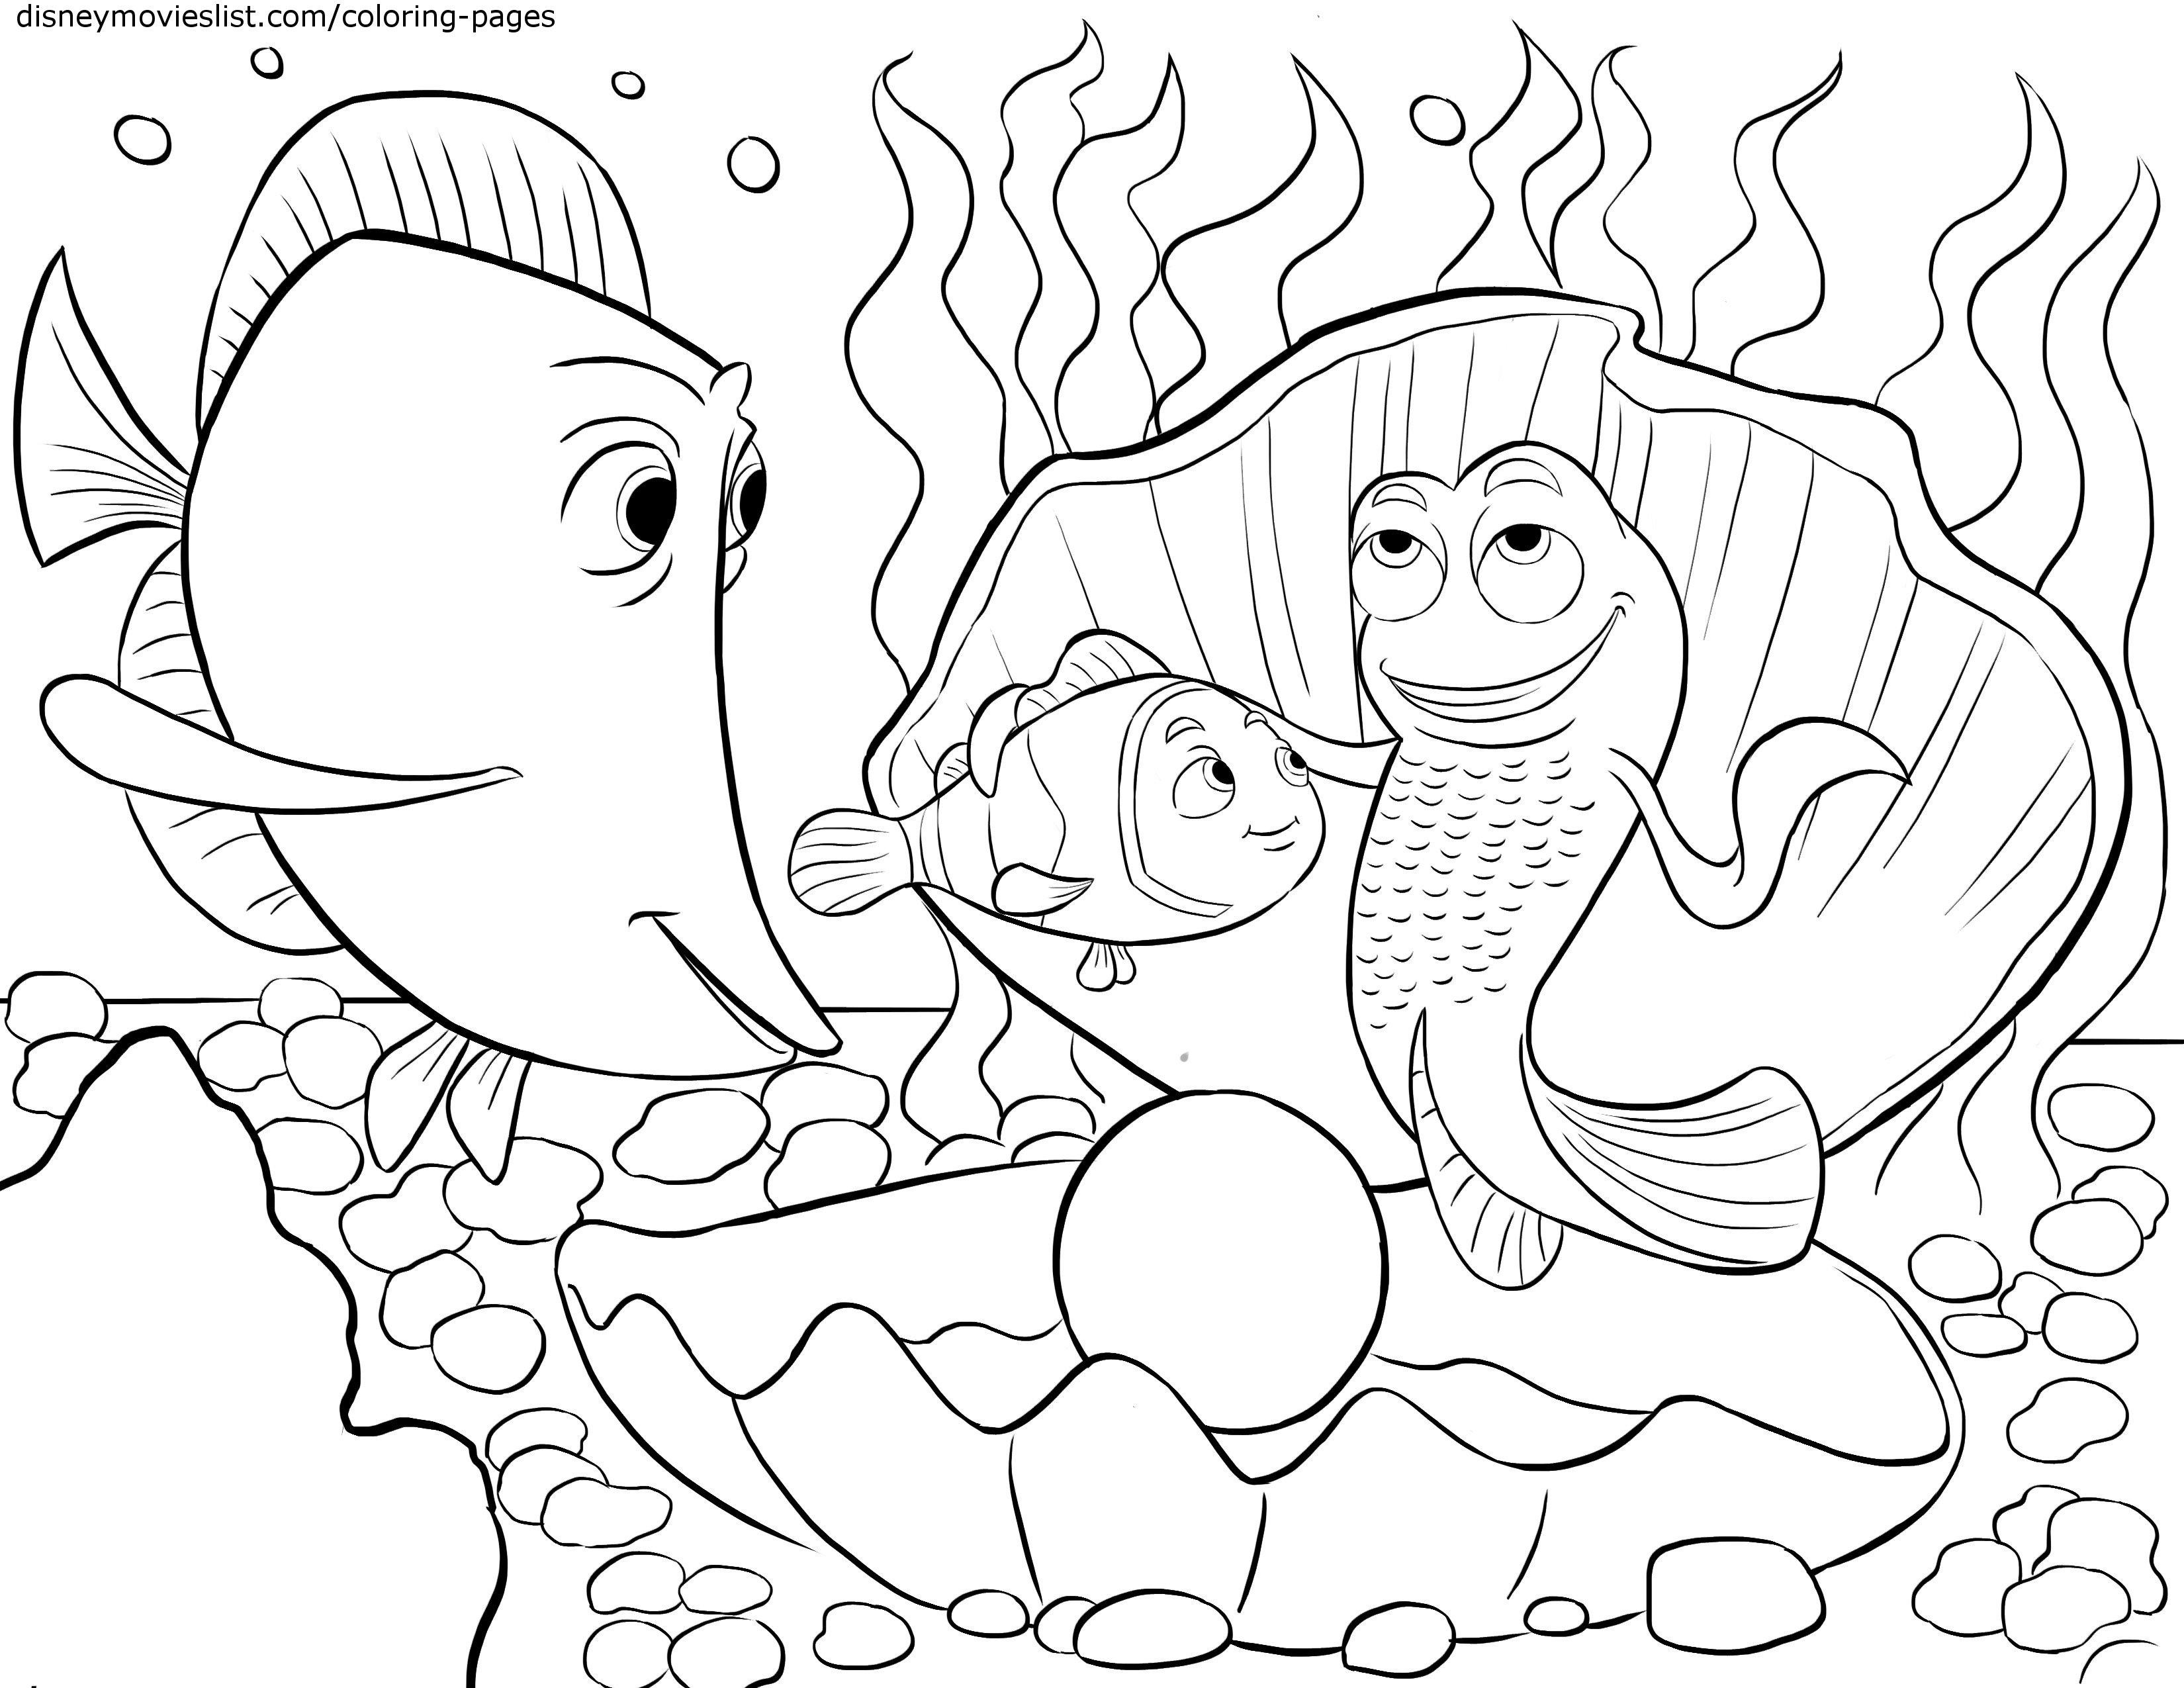 Free Coloring Pages Pdf
 Coloring Pages Marvellous Coloring Pages For Kids Pdf